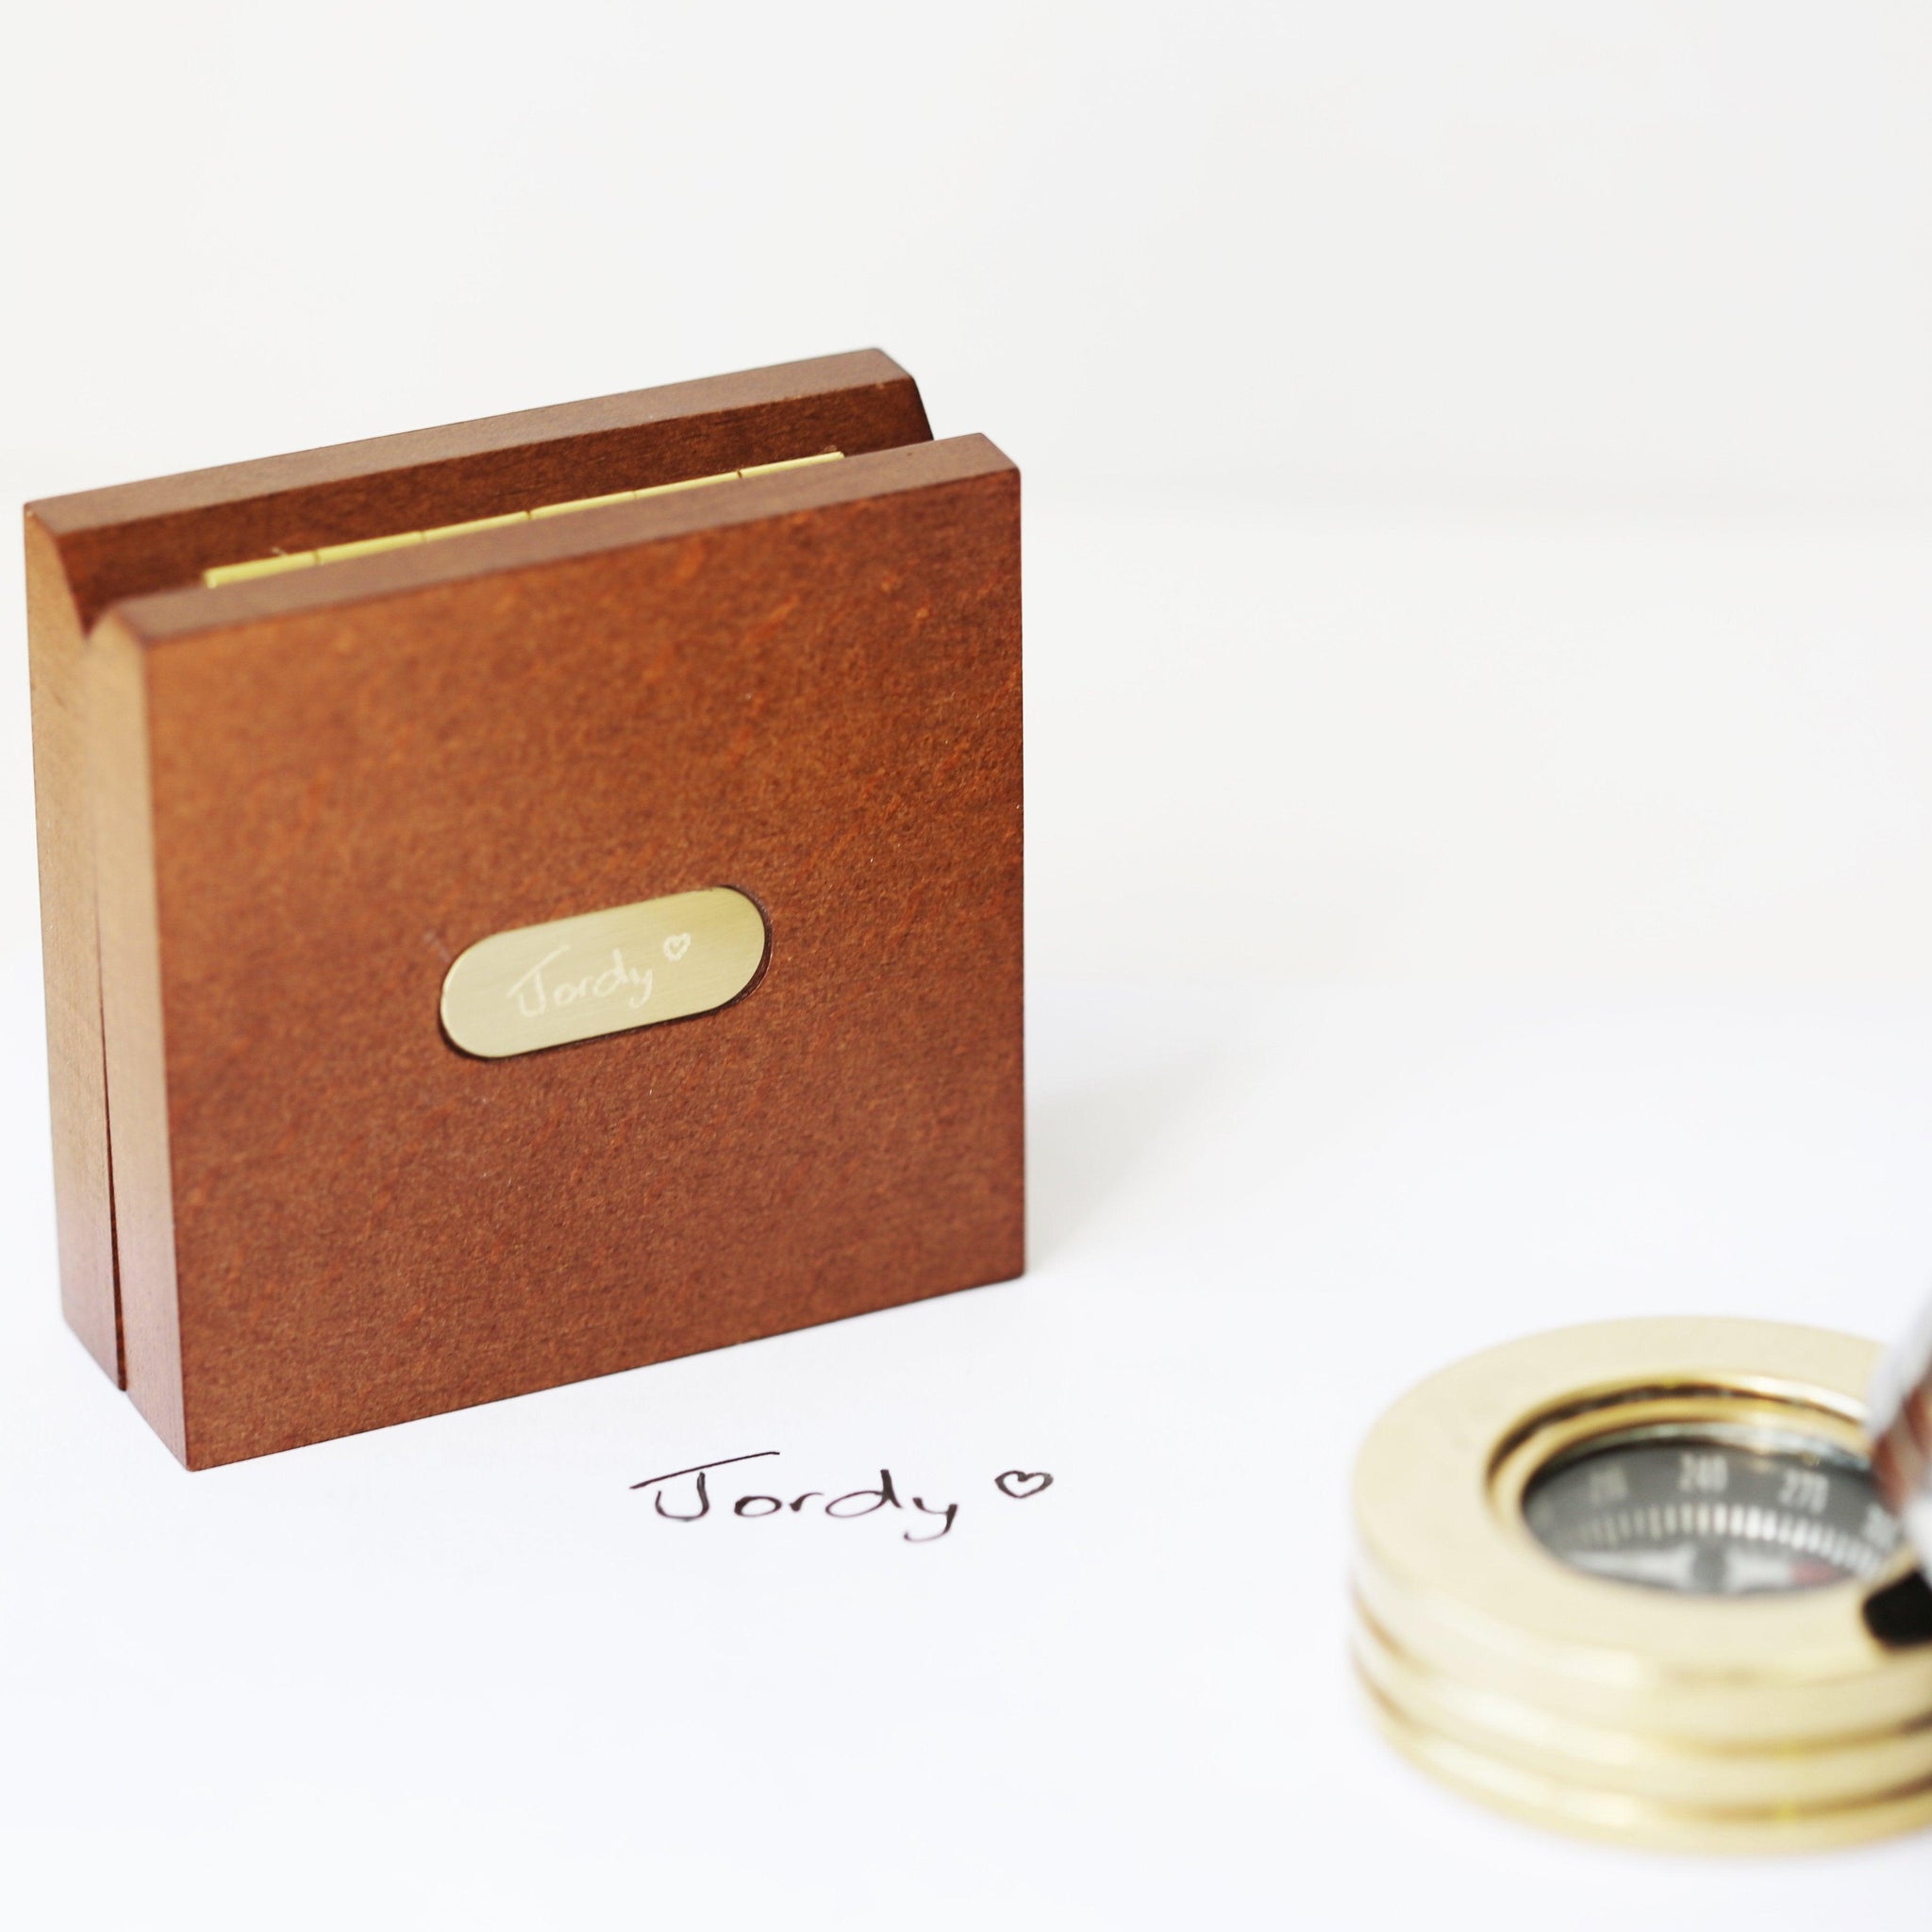 Own Handwriting Compass Personalised with Timber Box - Lantern Space